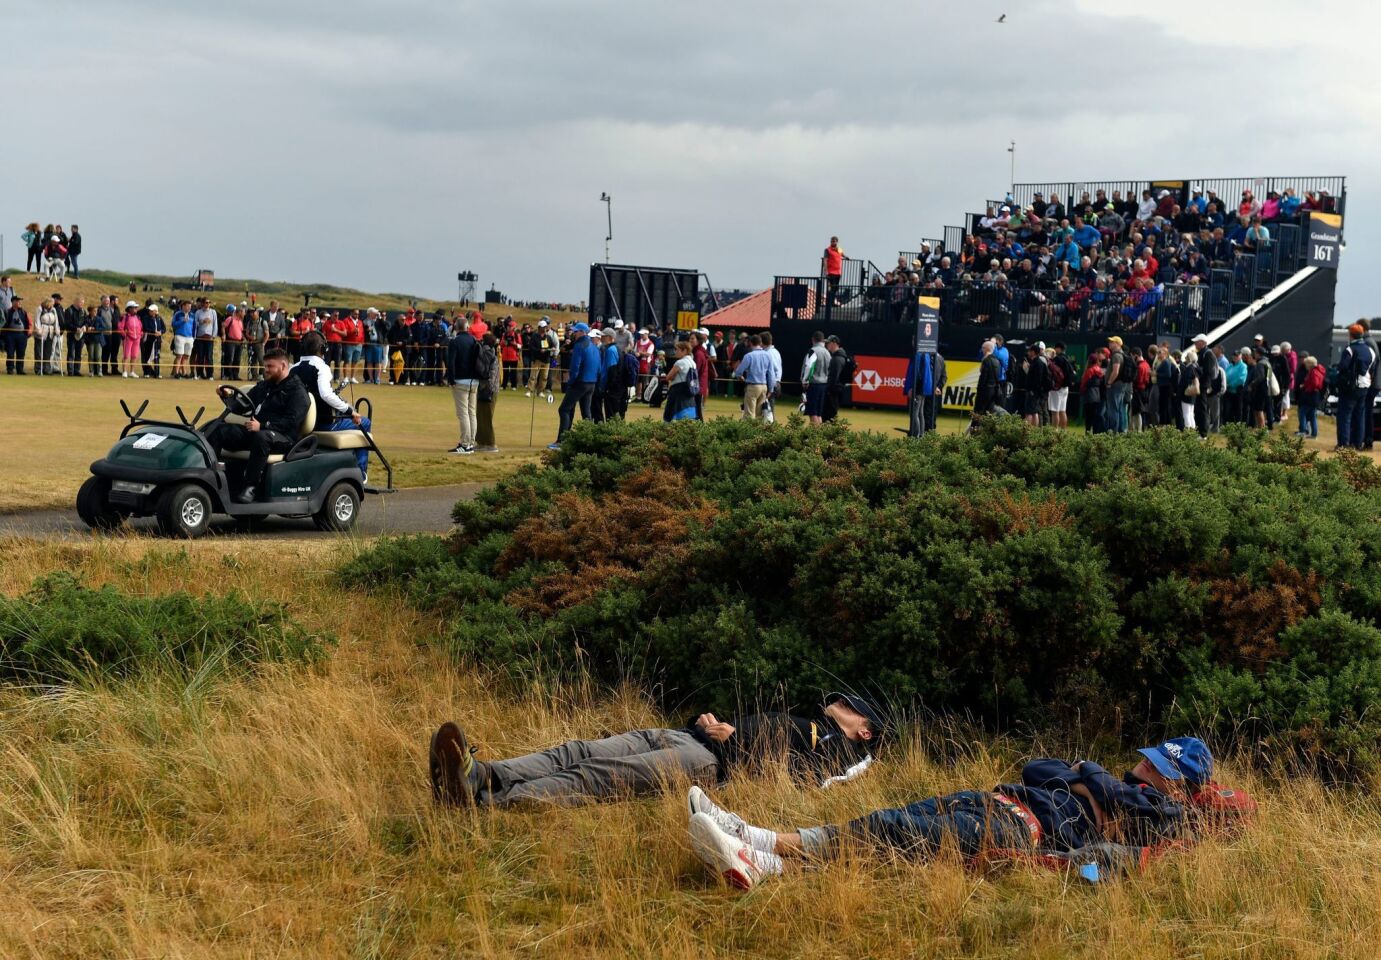 British Open spectators nap behind a clump of bushes at Carnoustie Golf Club in Carnoustie, Scotland.